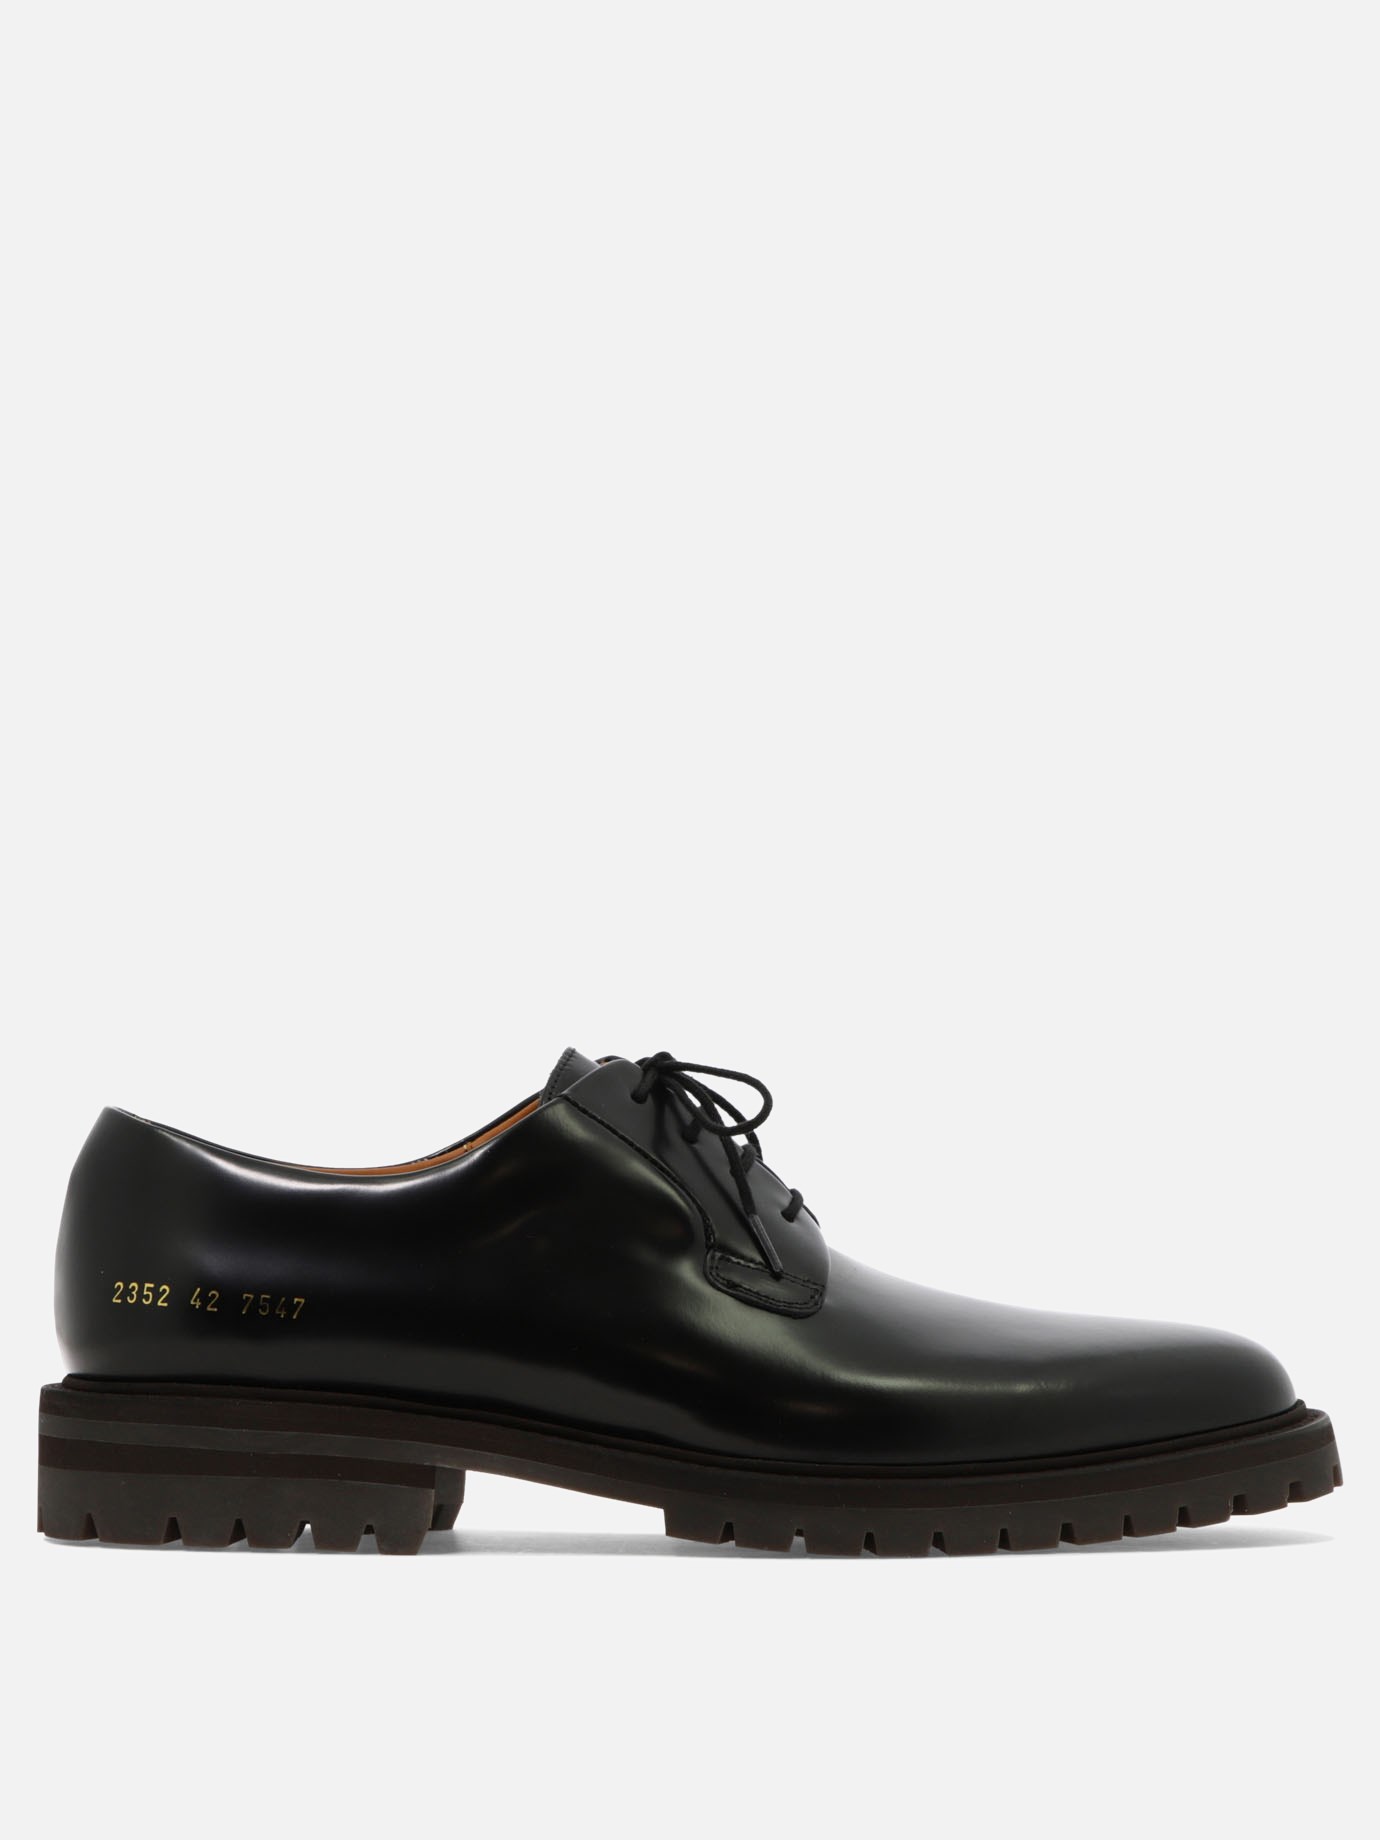  Derby  lace-up shoesby Common Projects - 3